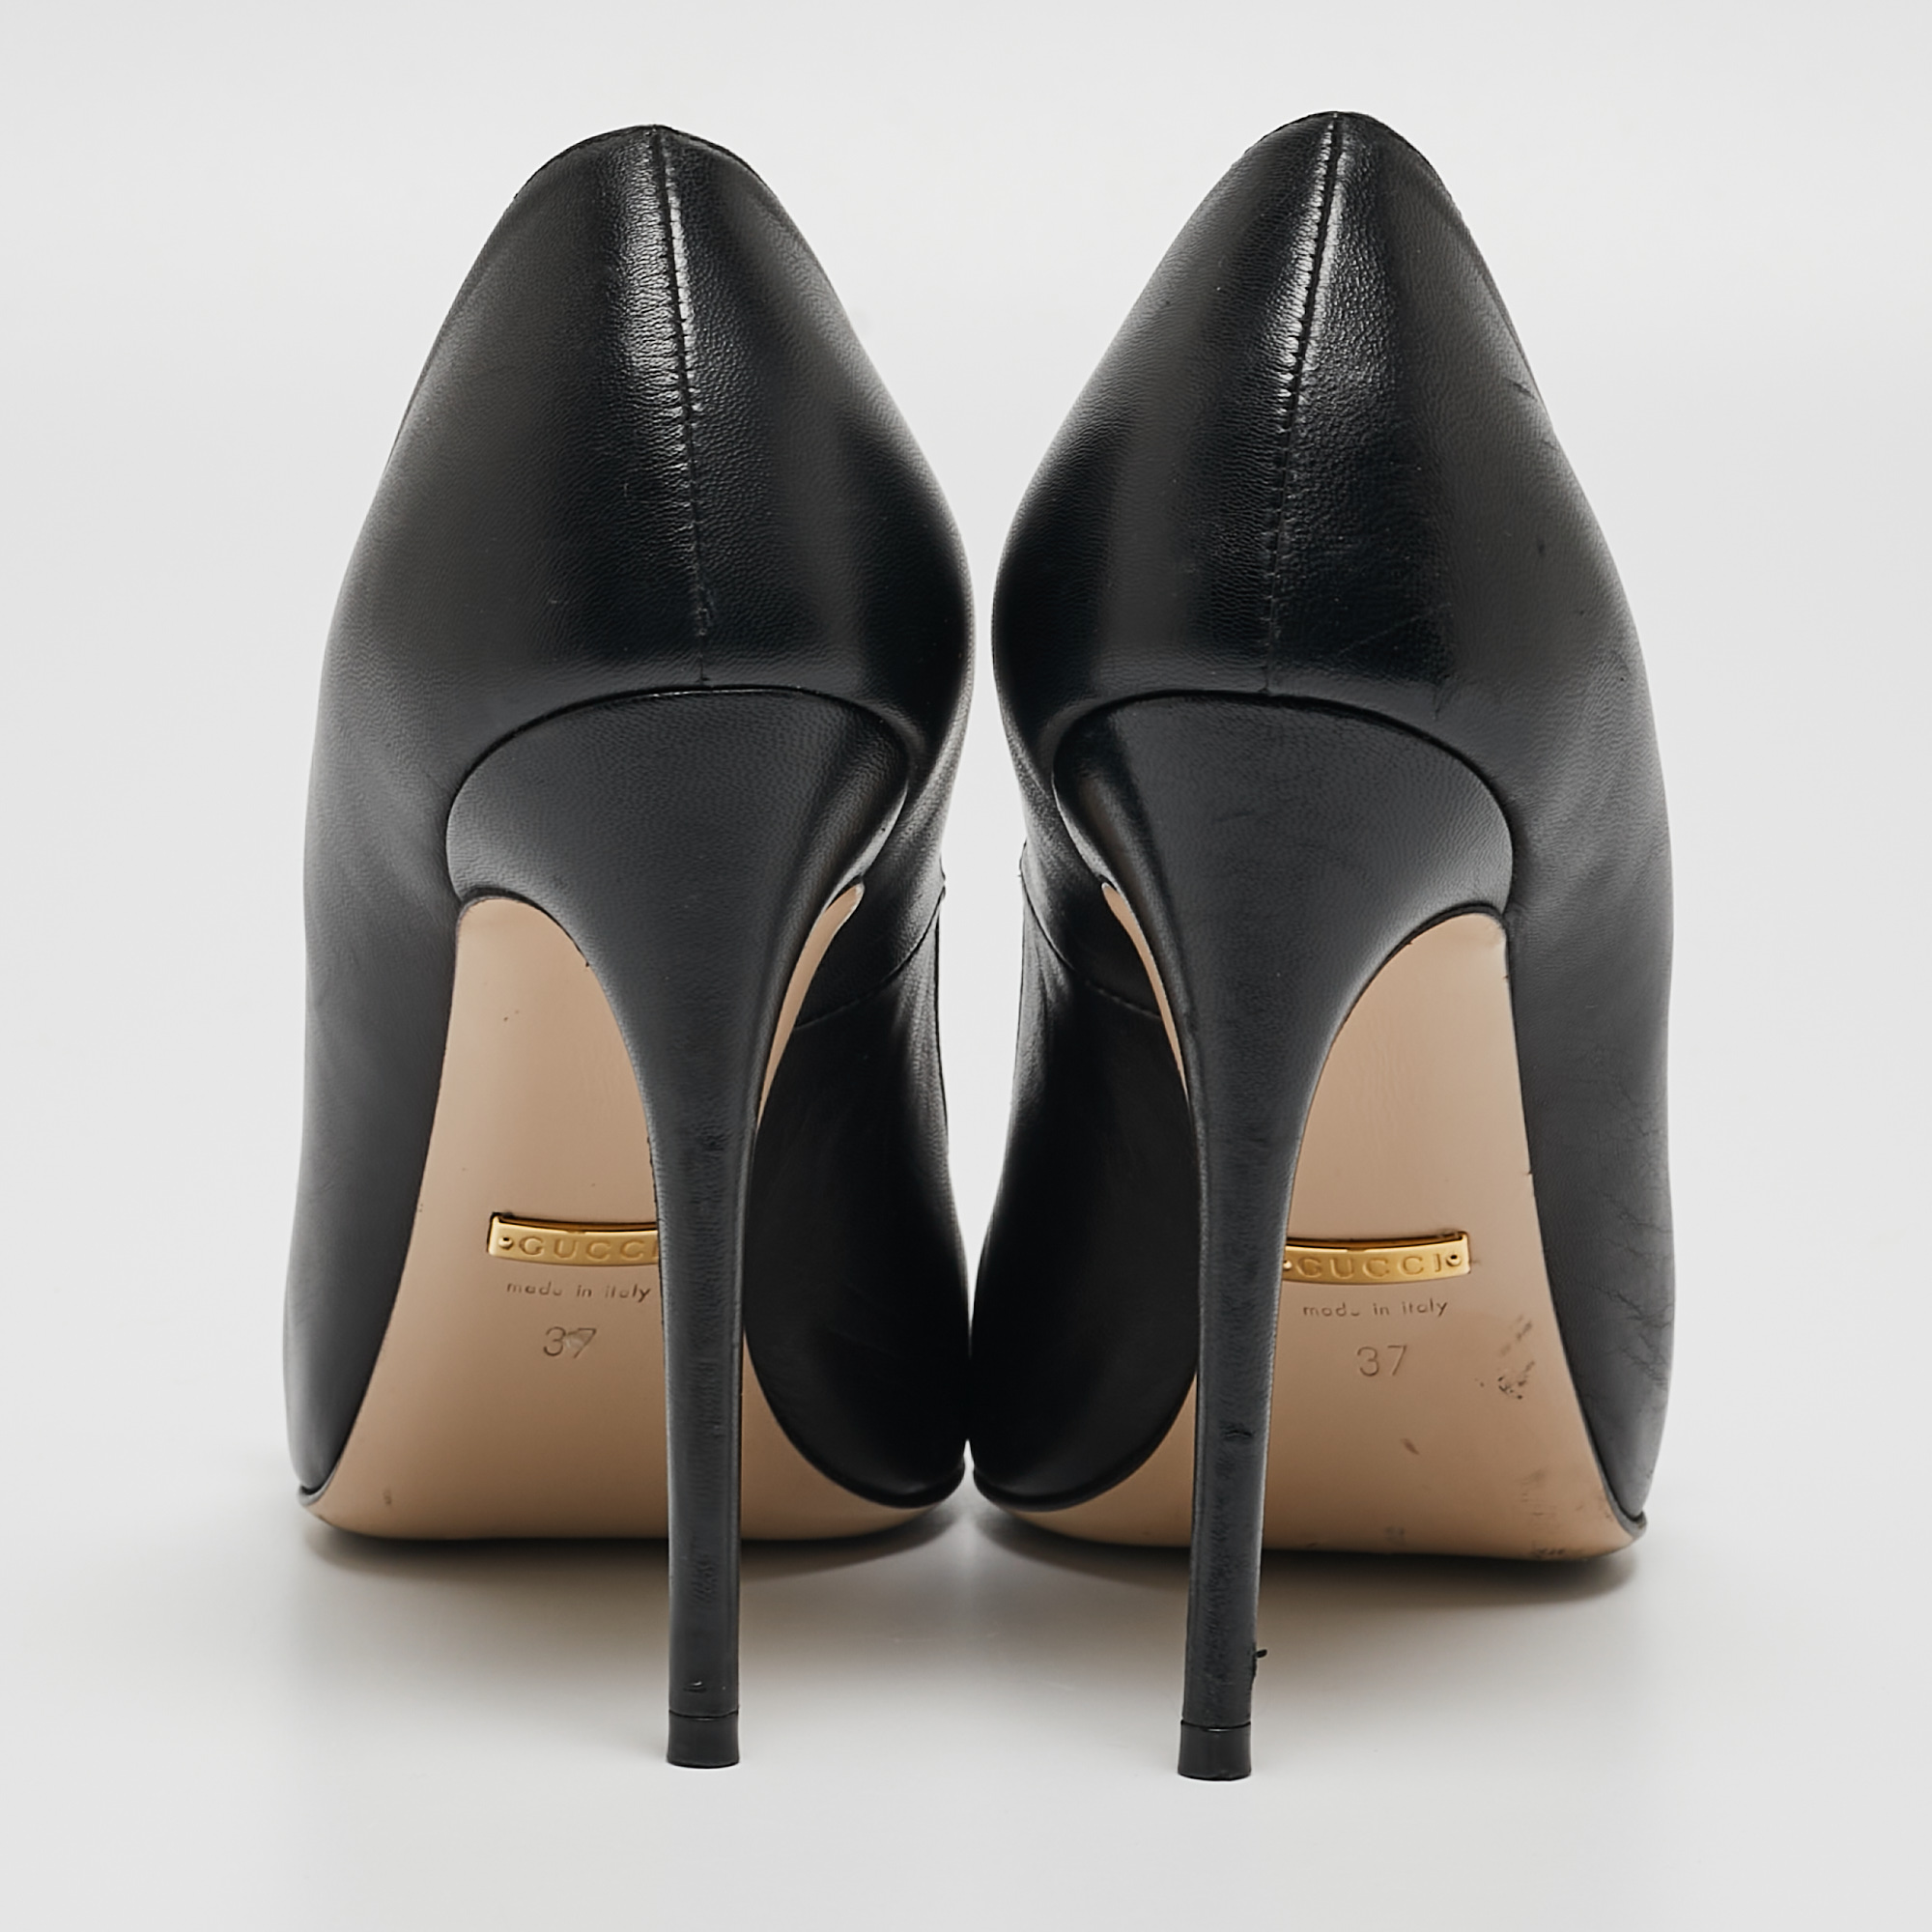 Gucci Black Leather Aneta Pointed Pumps Size 37